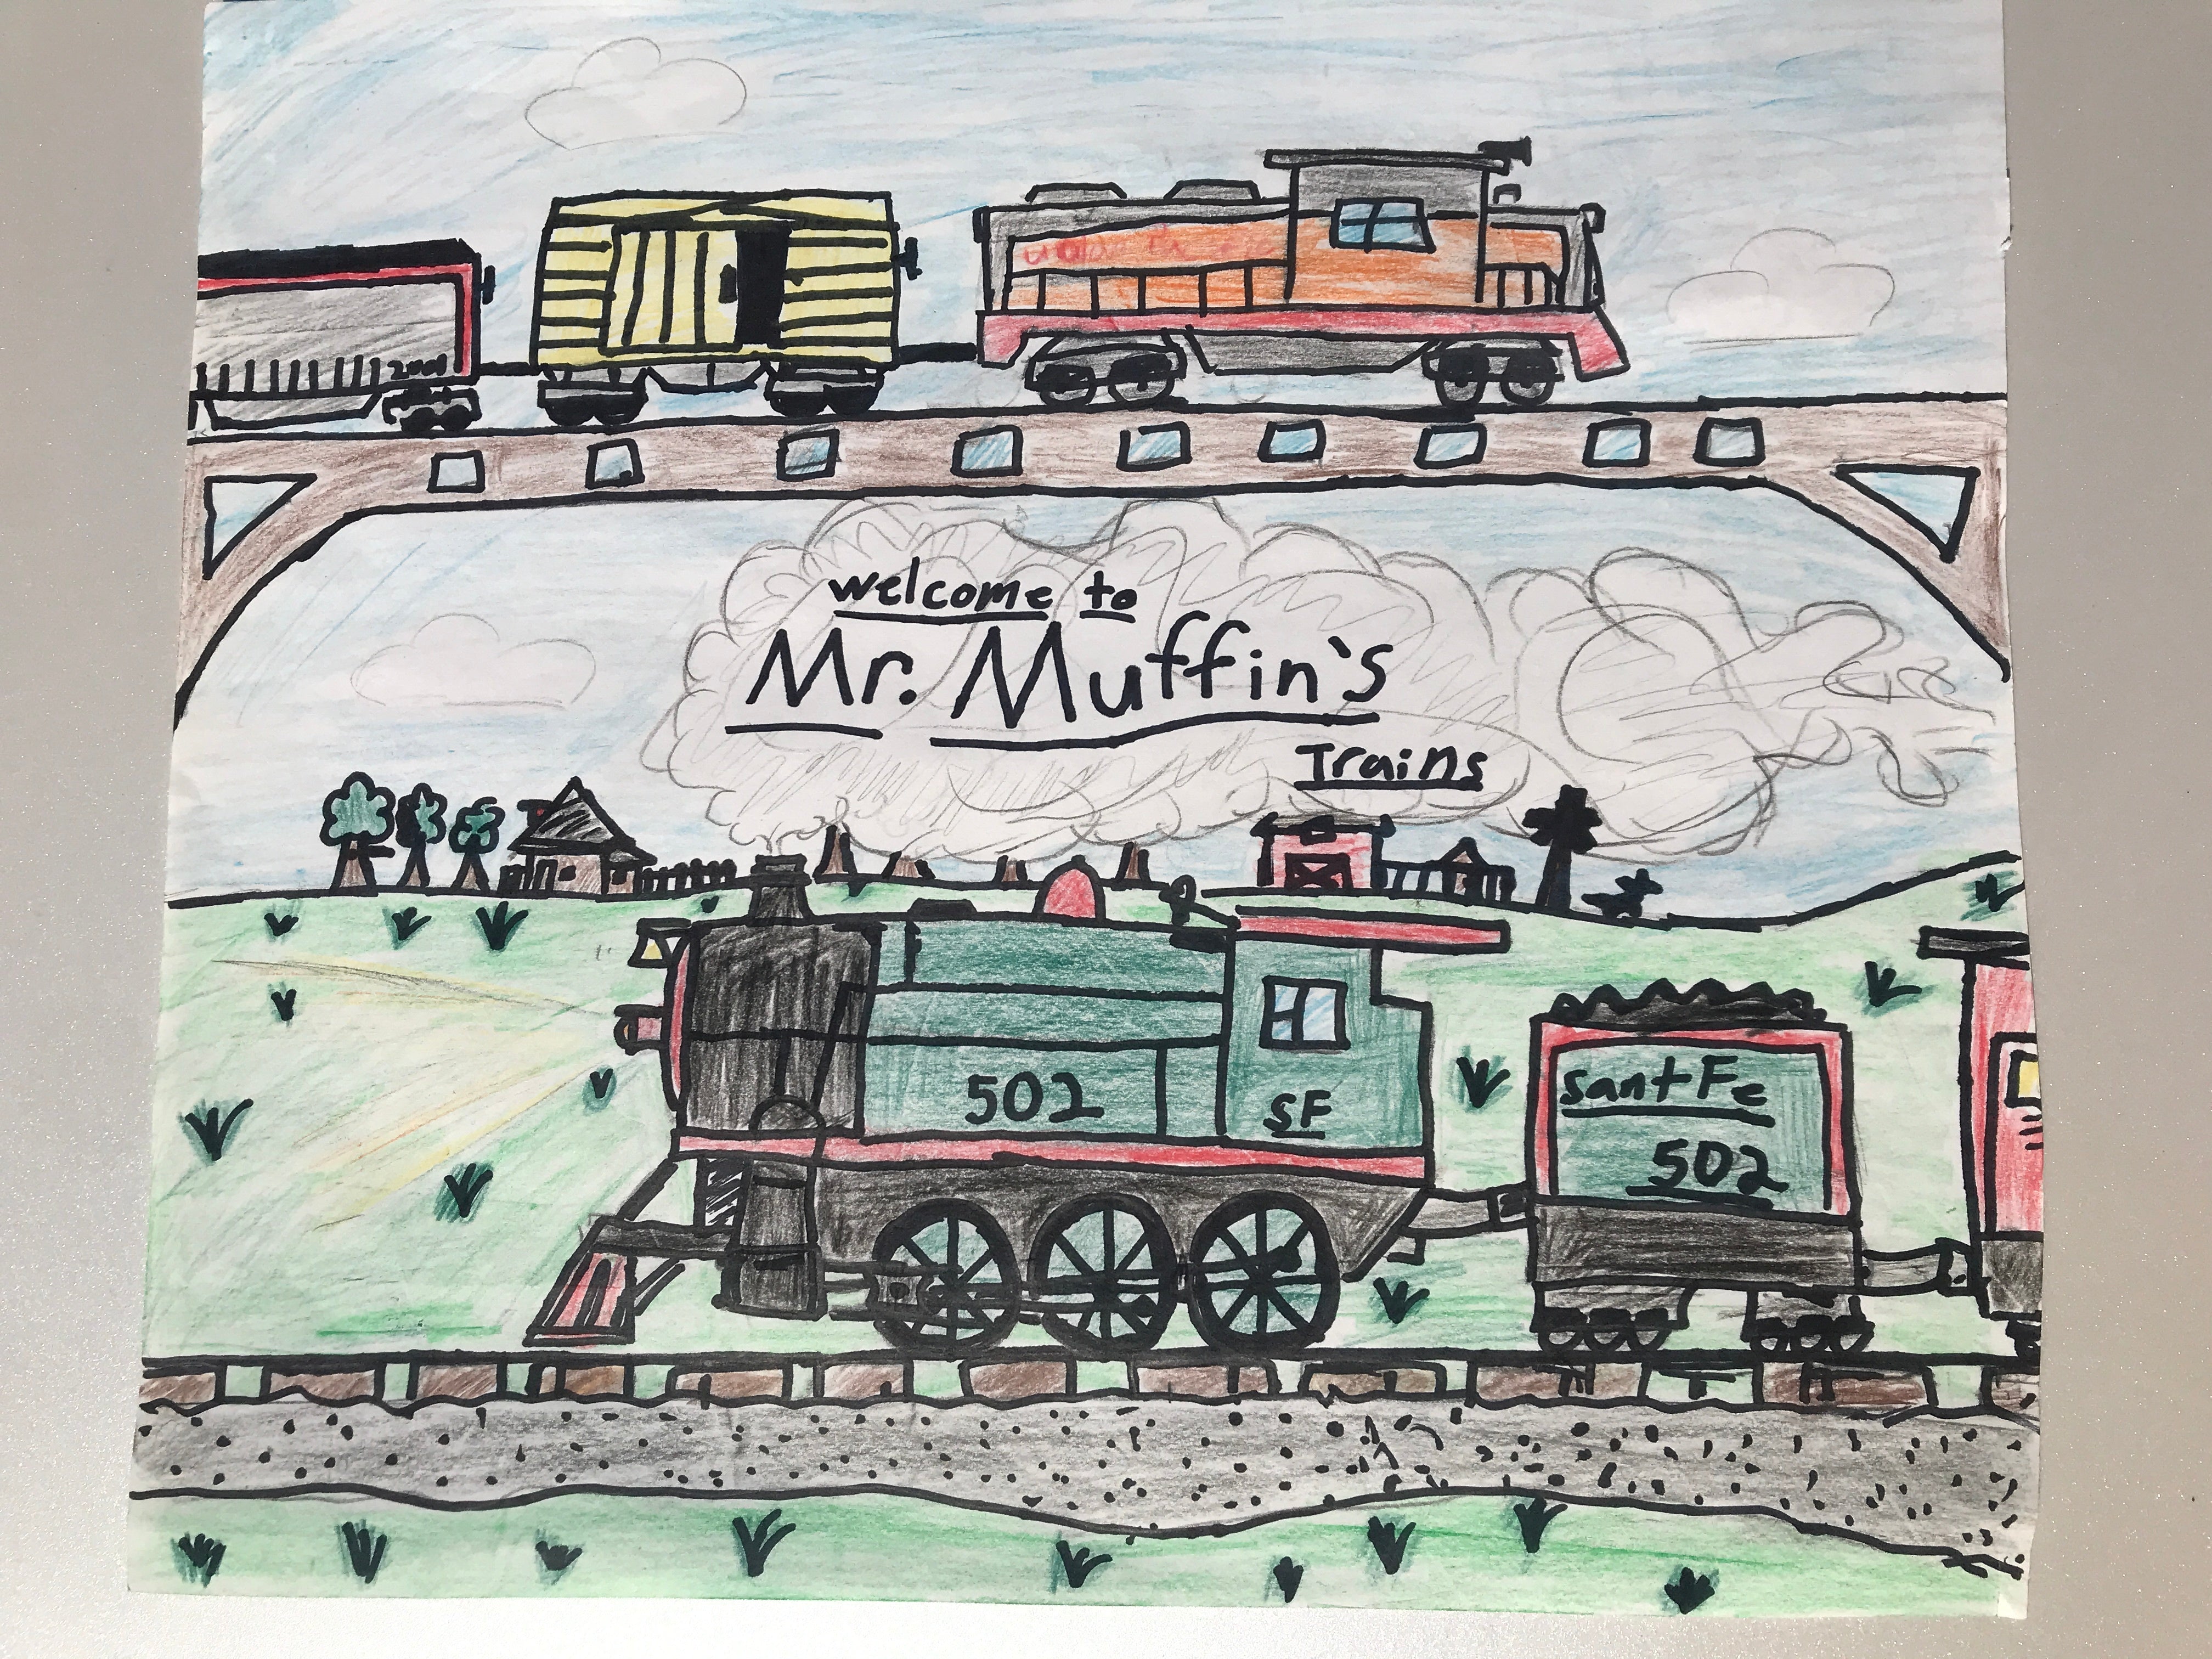 MrMuffin'sTrains' Coloring Contest July 2019